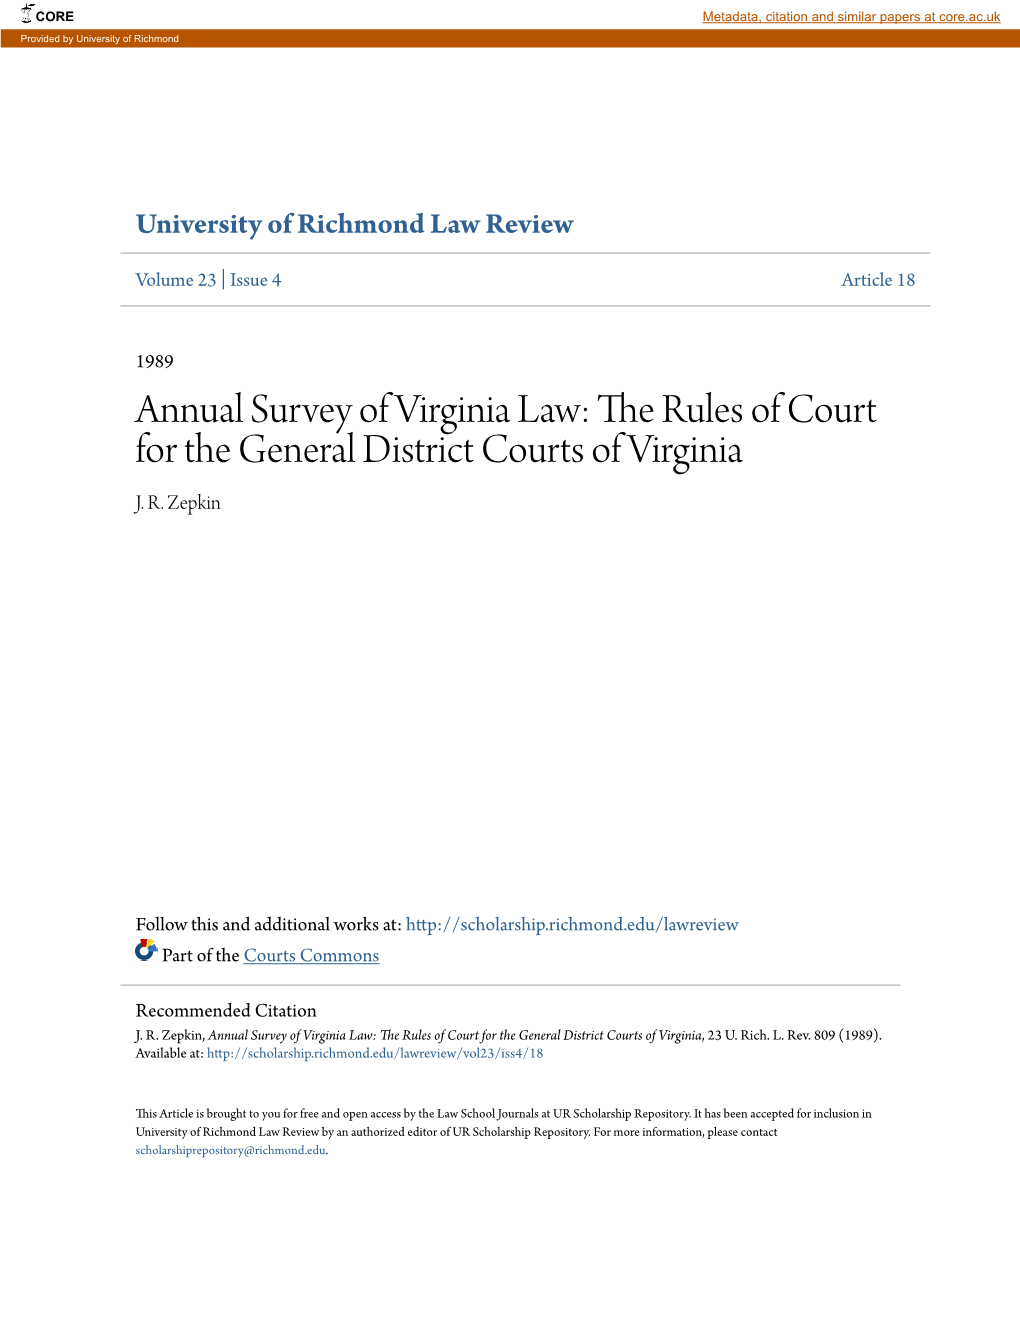 The Rules of Court for the General District Courts of Virginia, 23 U